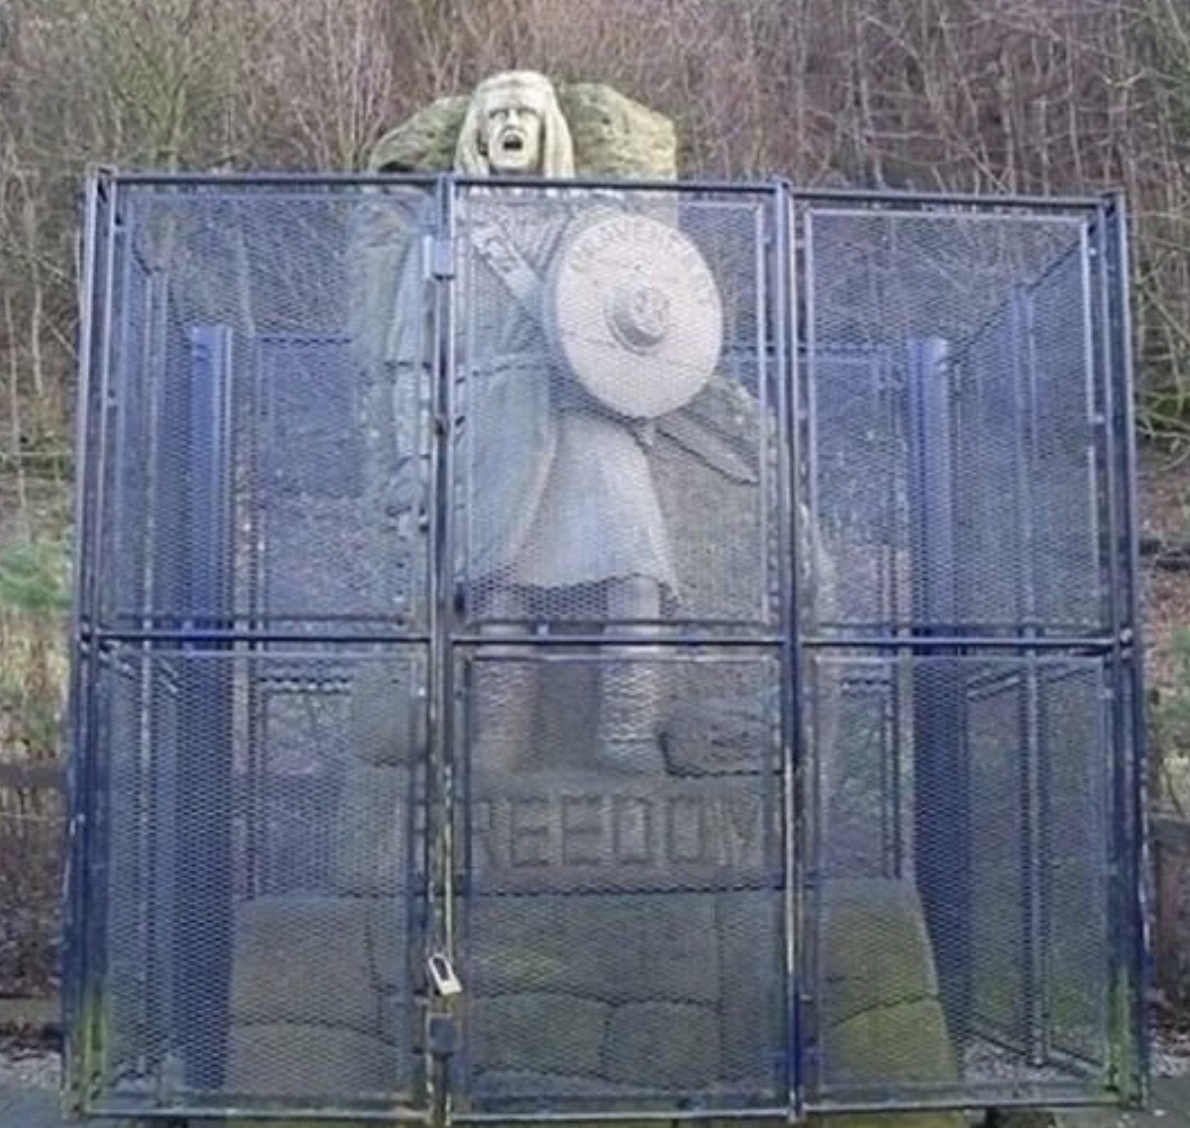 Statue of a figure with a shield and sword trapped behind a metal cage, with the word &quot;FREEDOM&quot; at the base